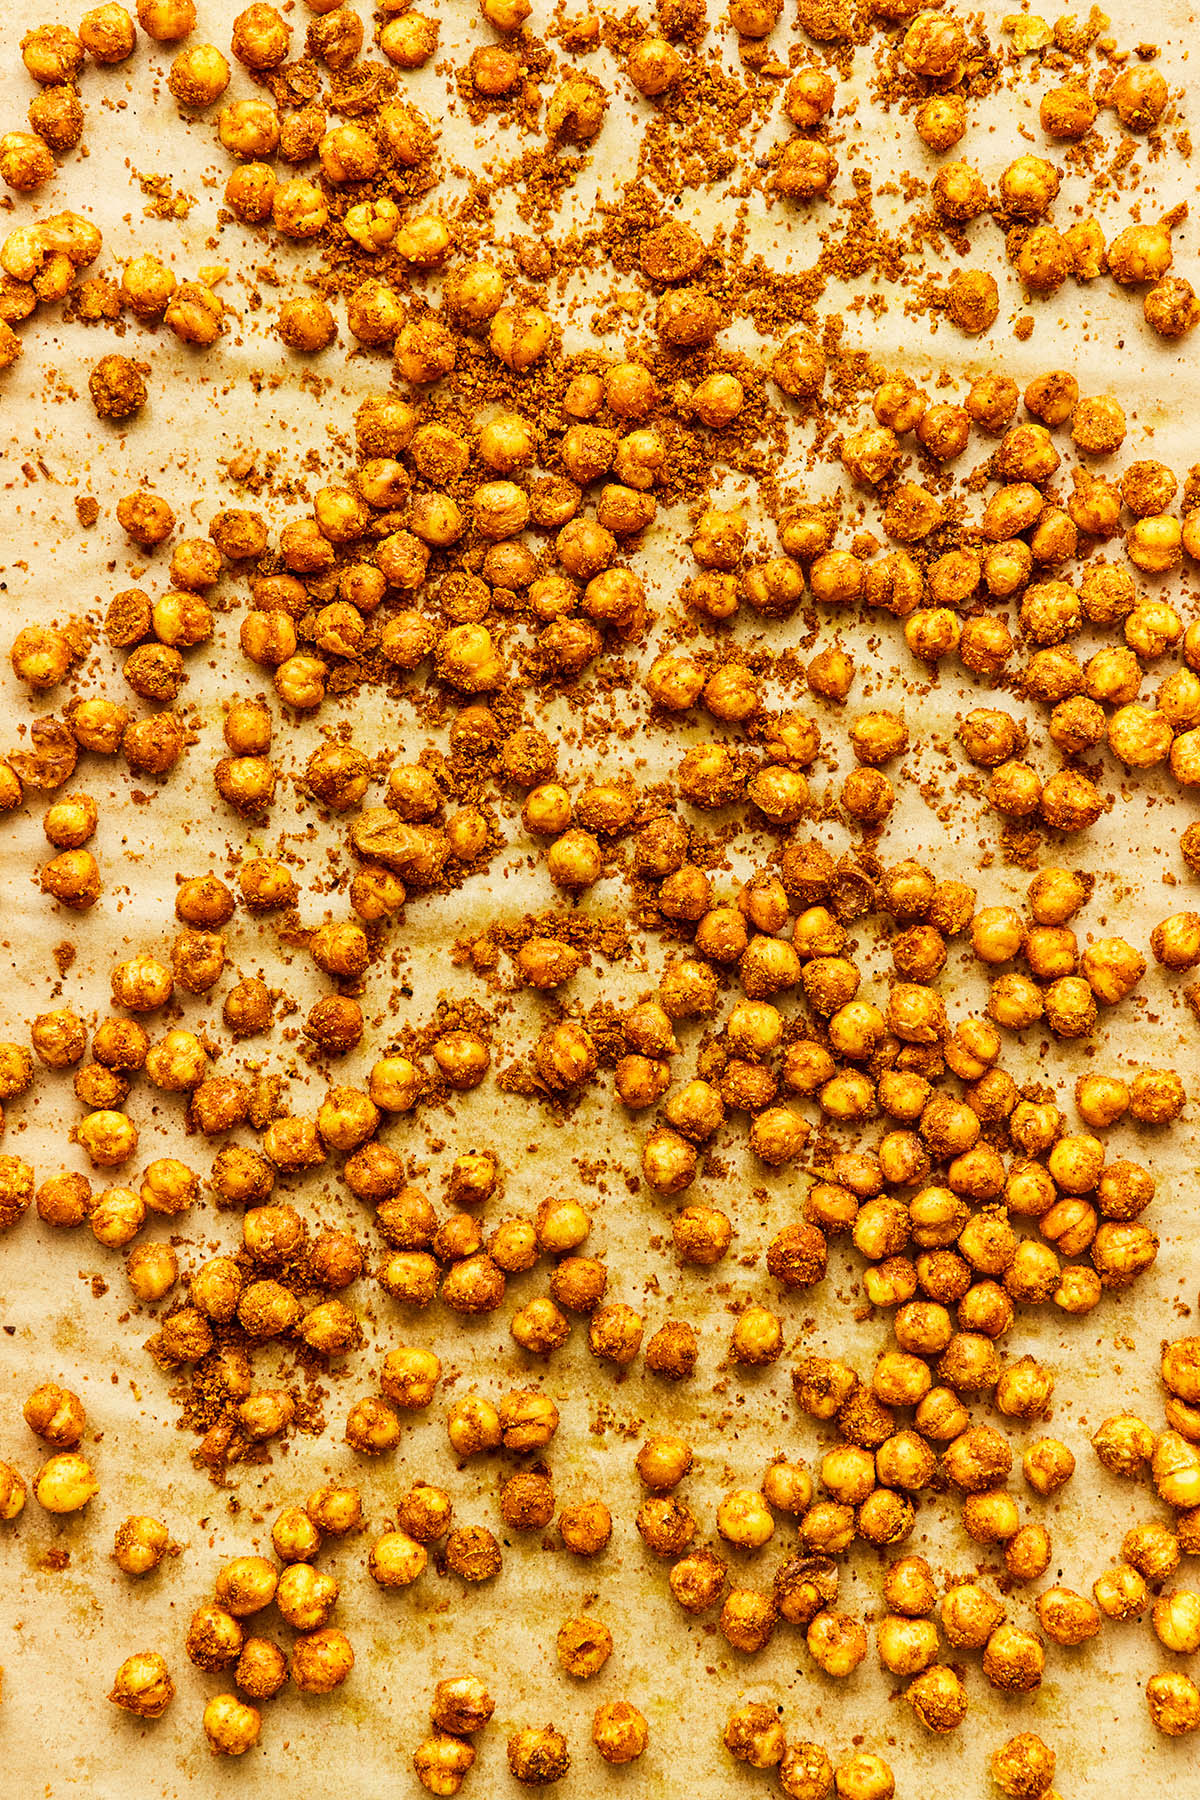 Cooked spiced chickpeas on a baking sheet lined with parchment paper.